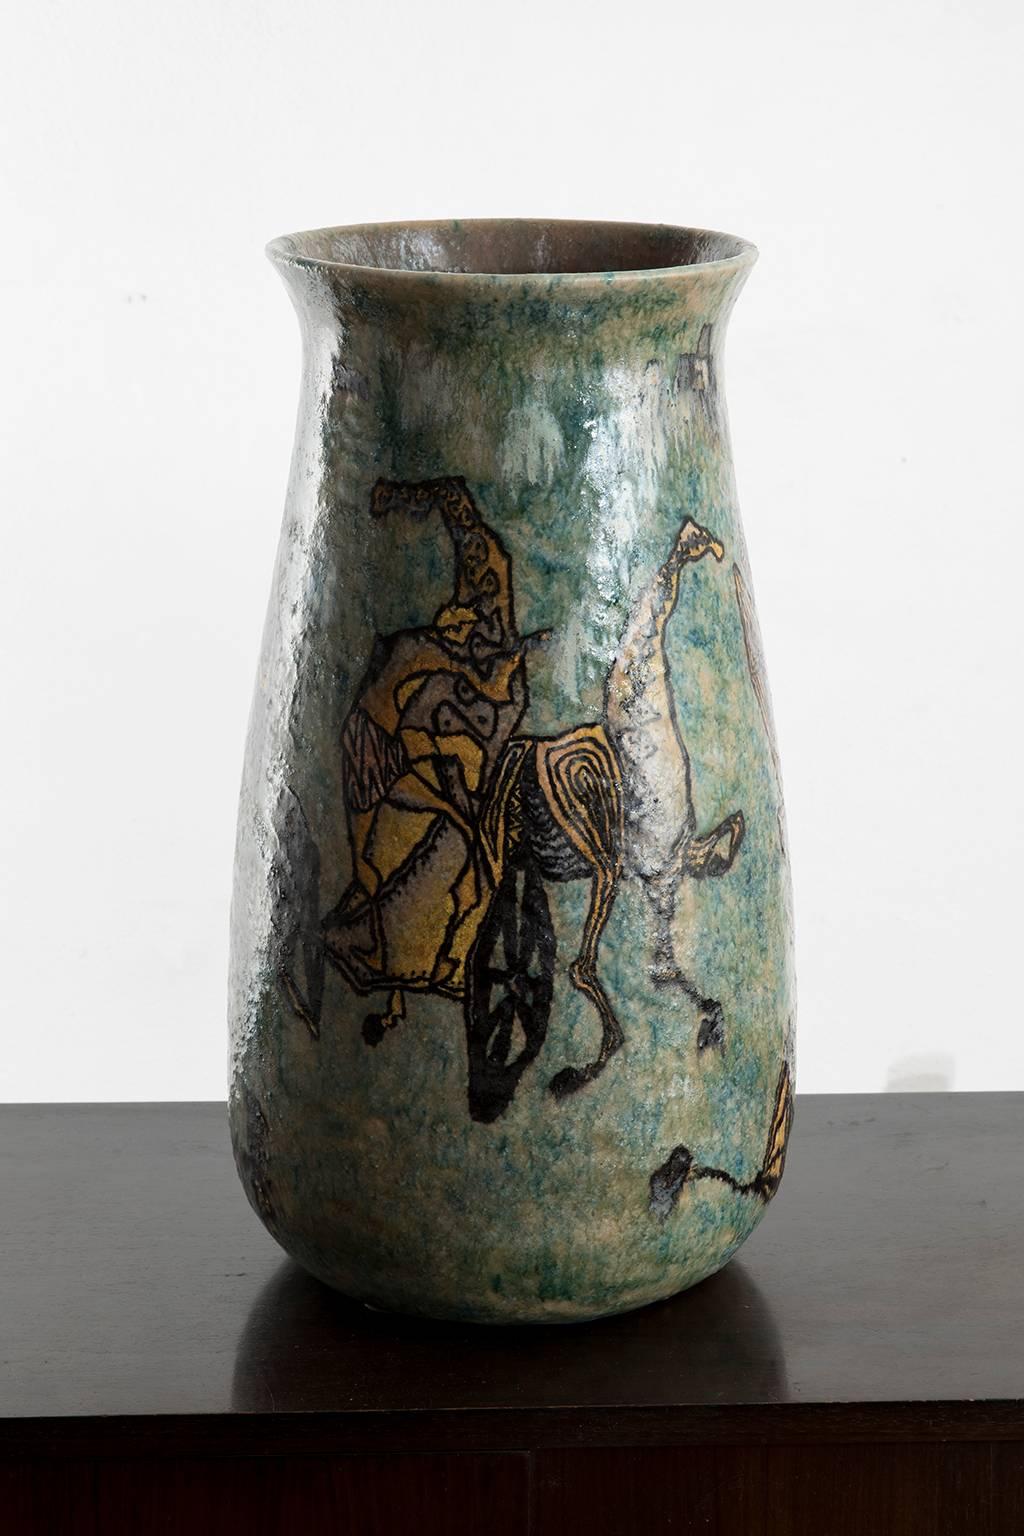 Monumental mythology themed vase created by the ceramist and sculptor Carlo Zauli in the early 1950s. Turquoise glaze in the background with magnificent Greek warriors fighting.
Signed 'Zauli Faenza' on the bottom.

Carlo Zauli (Faenza,